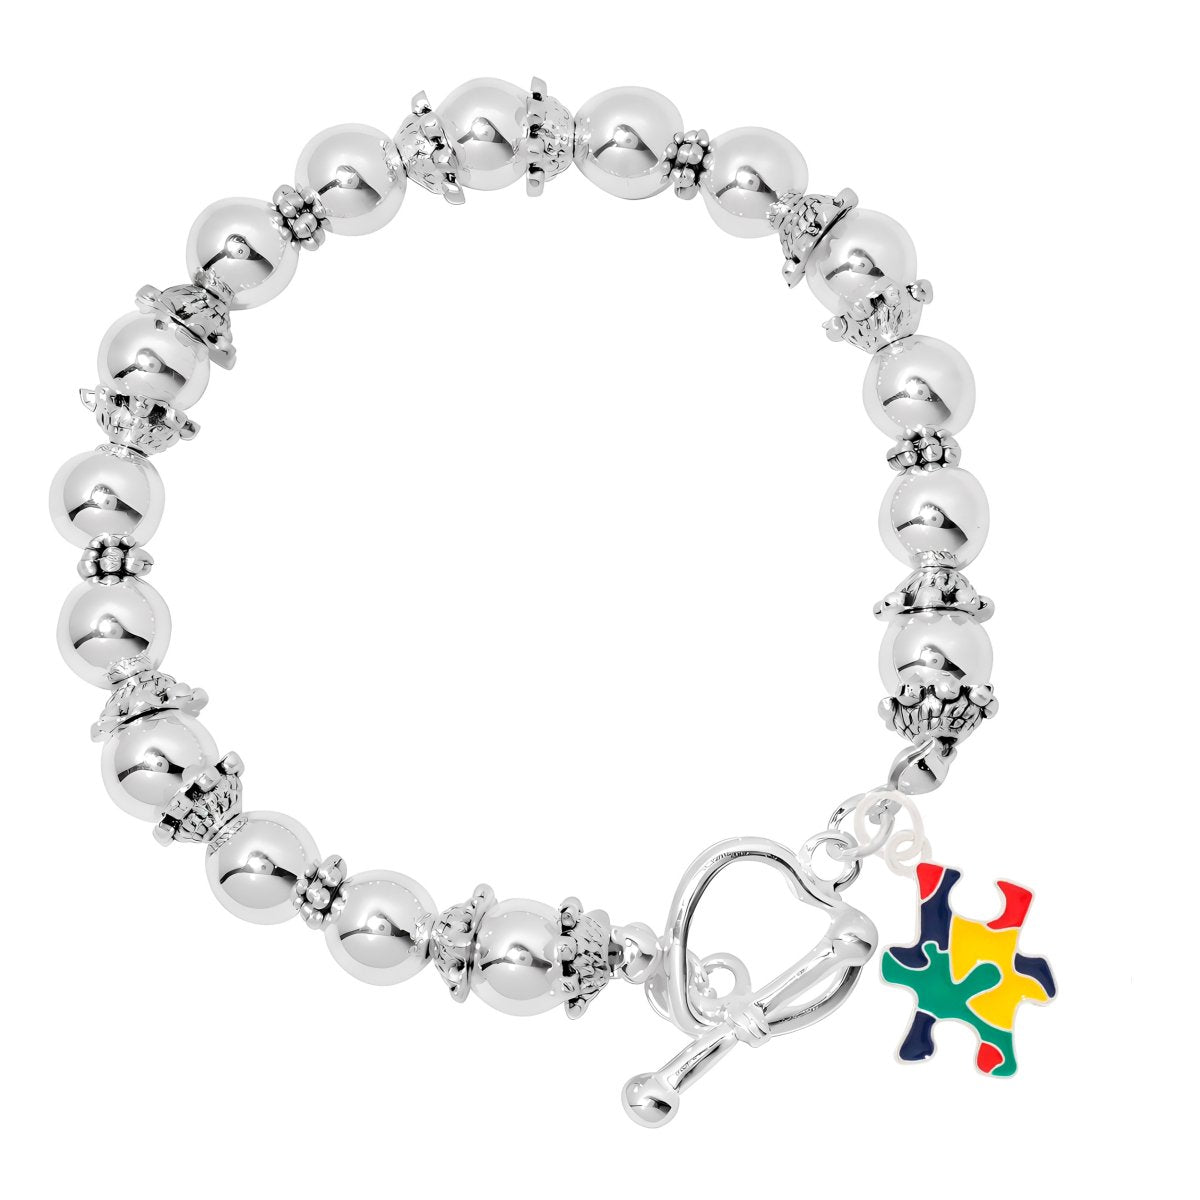 Autism Colored Puzzle Piece Silver Beaded Bracelets - Fundraising For A Cause